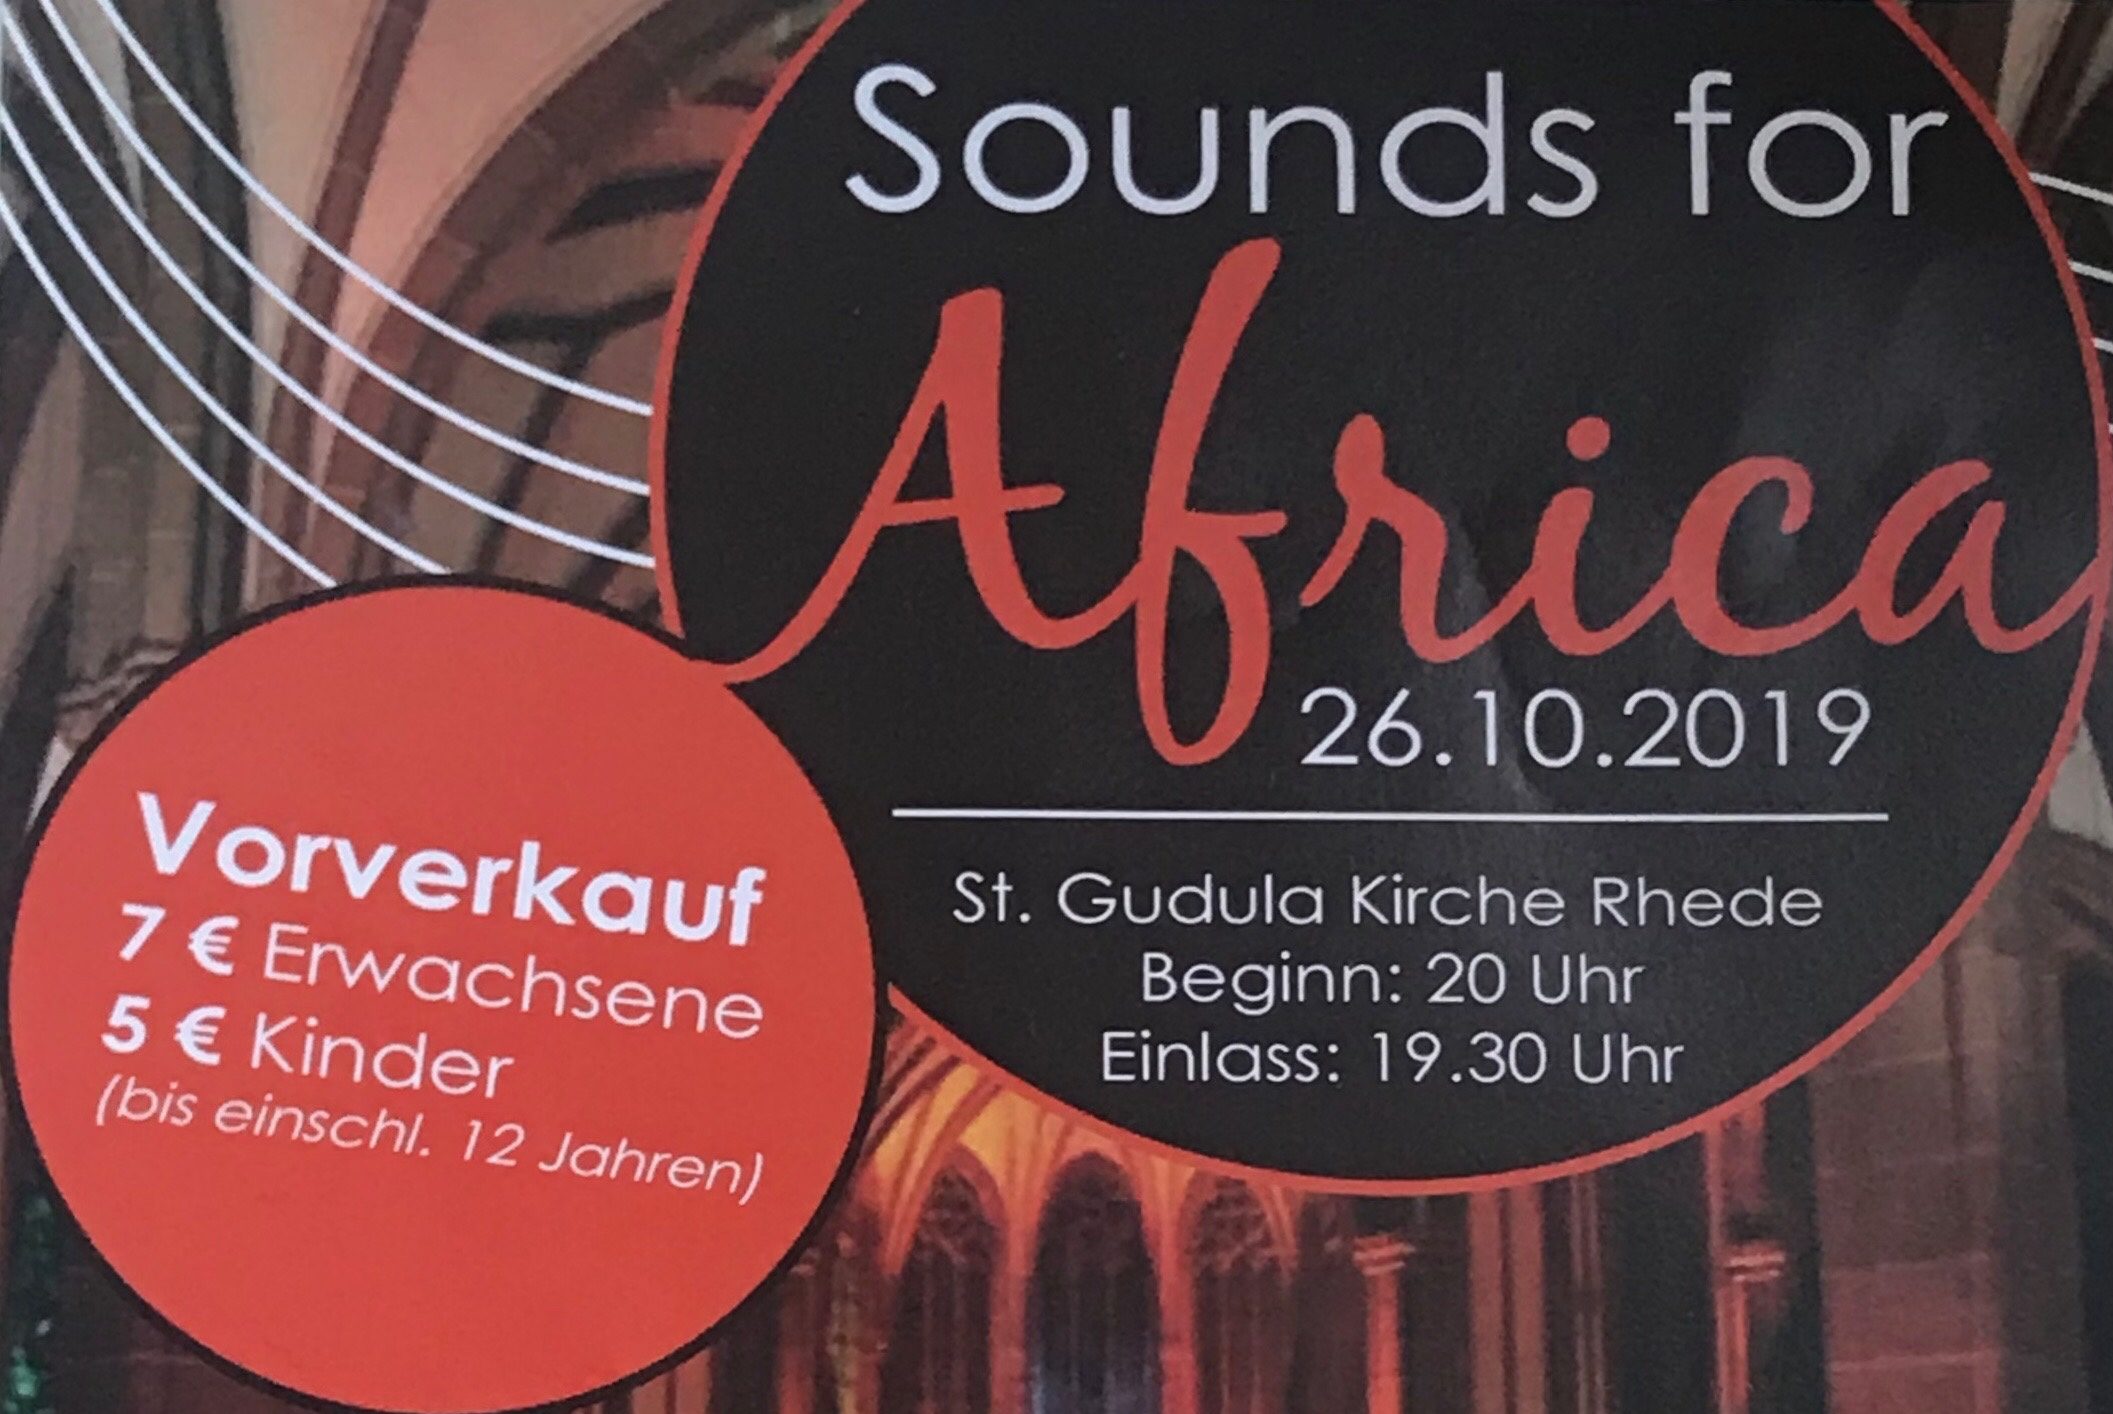 Sounds for Africa